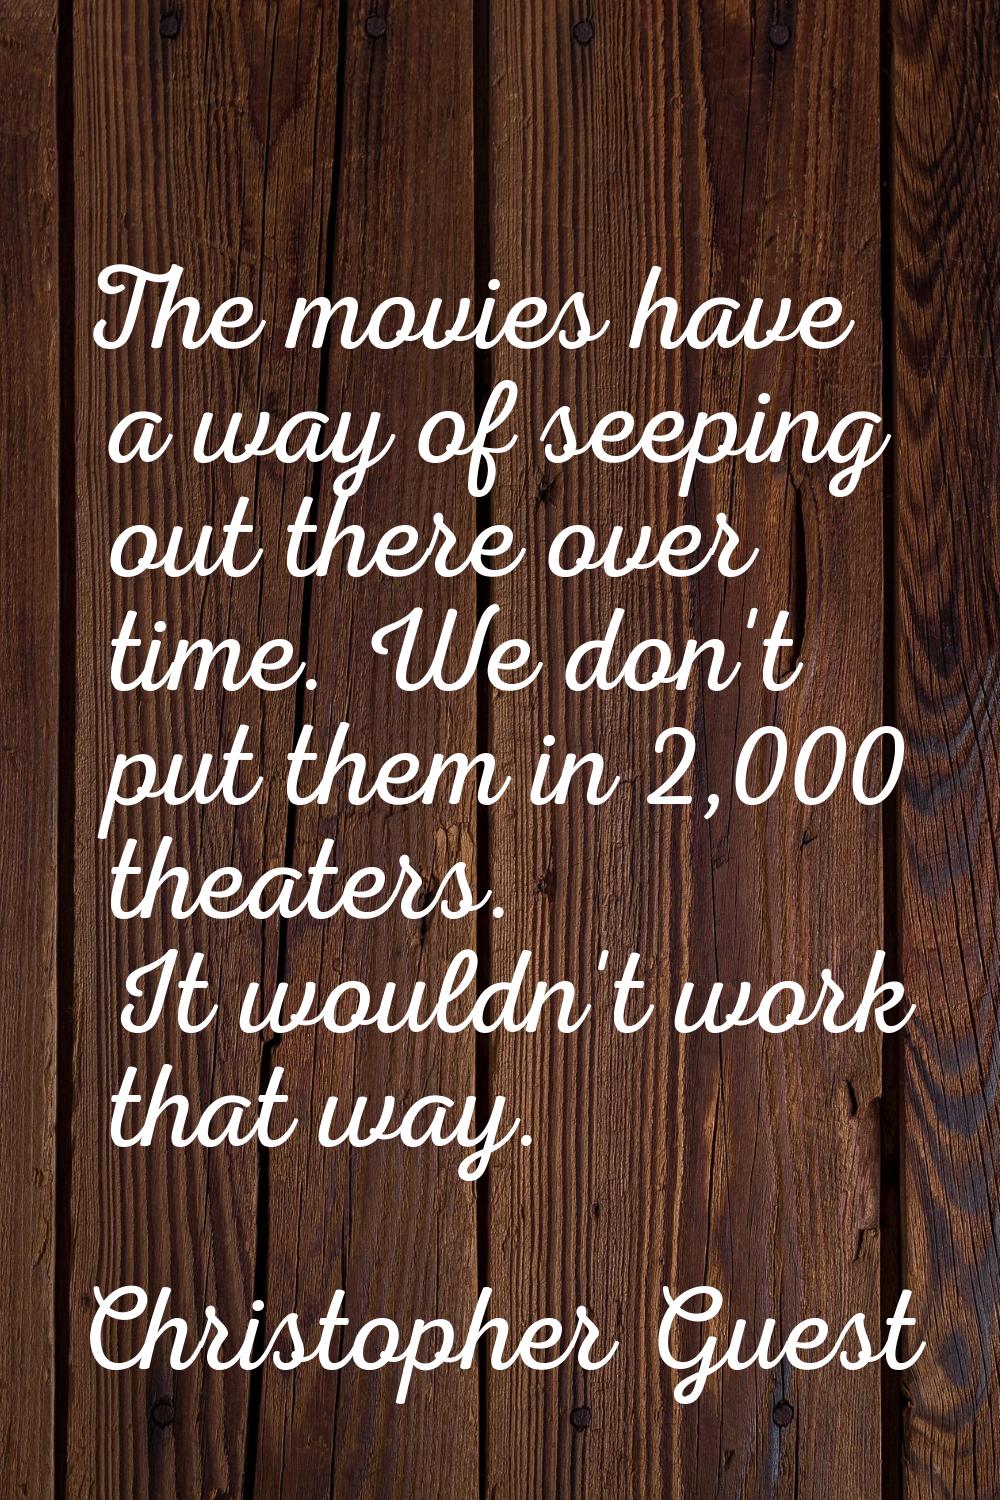 The movies have a way of seeping out there over time. We don't put them in 2,000 theaters. It would